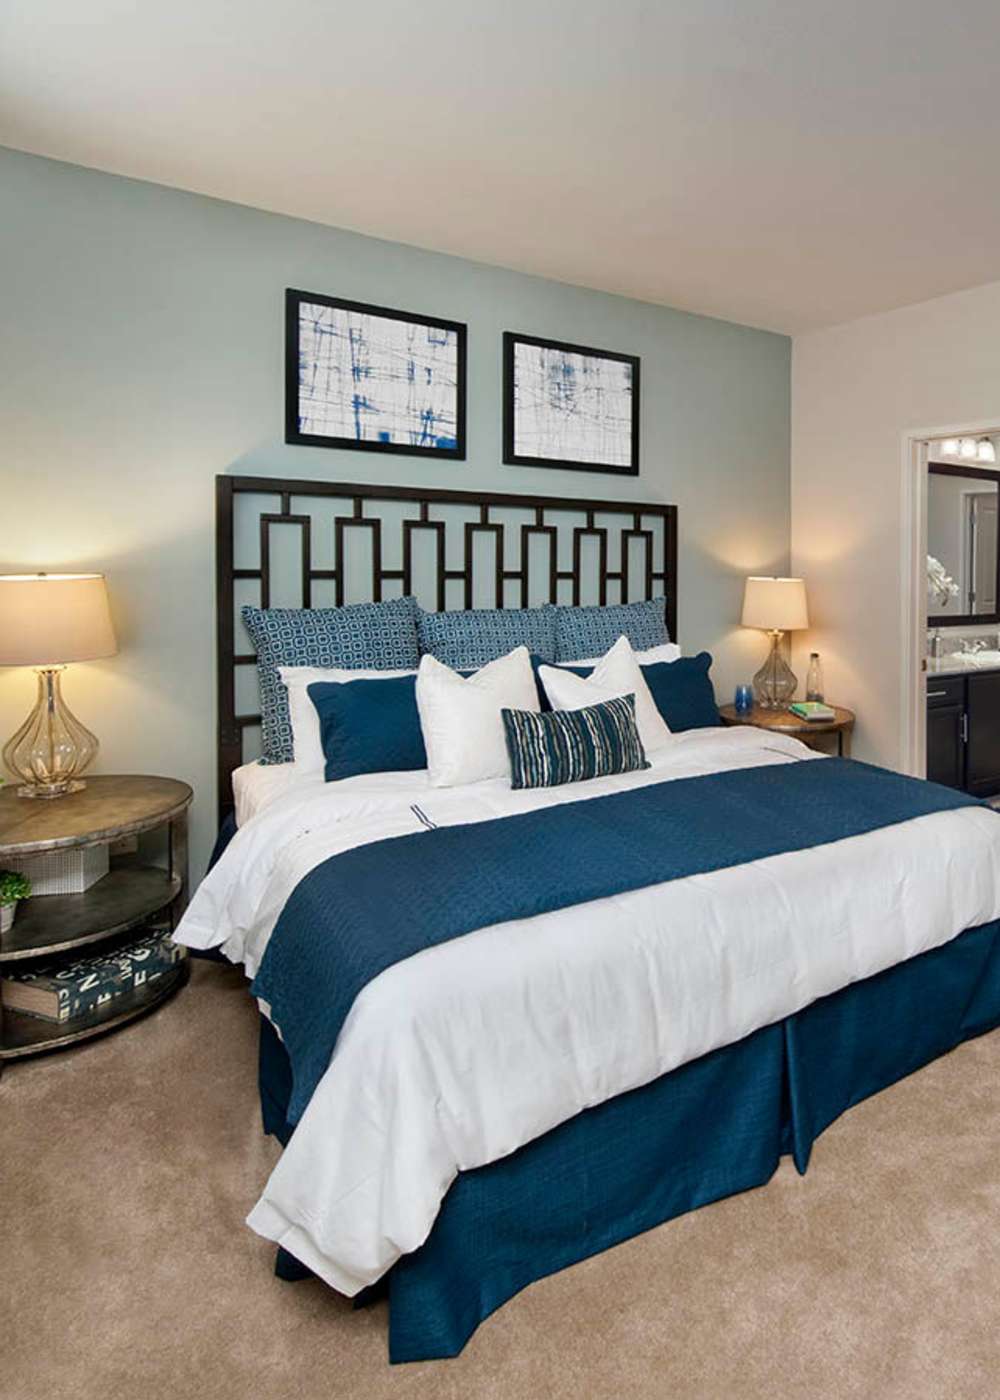 Bedroom at Lane Parke Apartments in Mountain Brook, Alabama